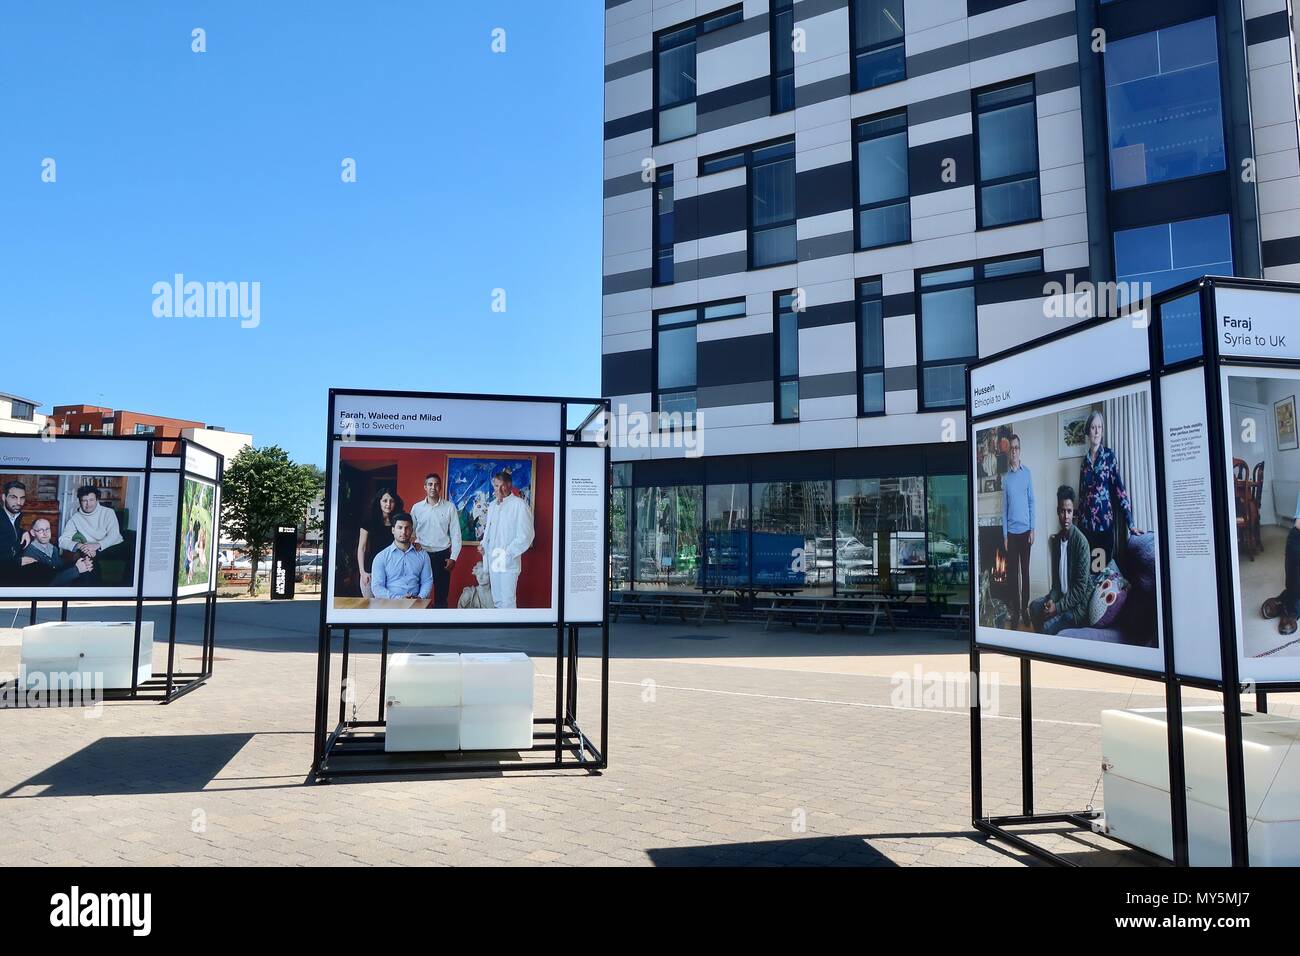 Ipswich, UK. 6th Jun, 2018. UK News: Photoeast - photography exhibition and workshops until 24/6/18. Venues at Ipswich waterfront, Suffolk. Credit: Angela Chalmers/Alamy Live News Stock Photo